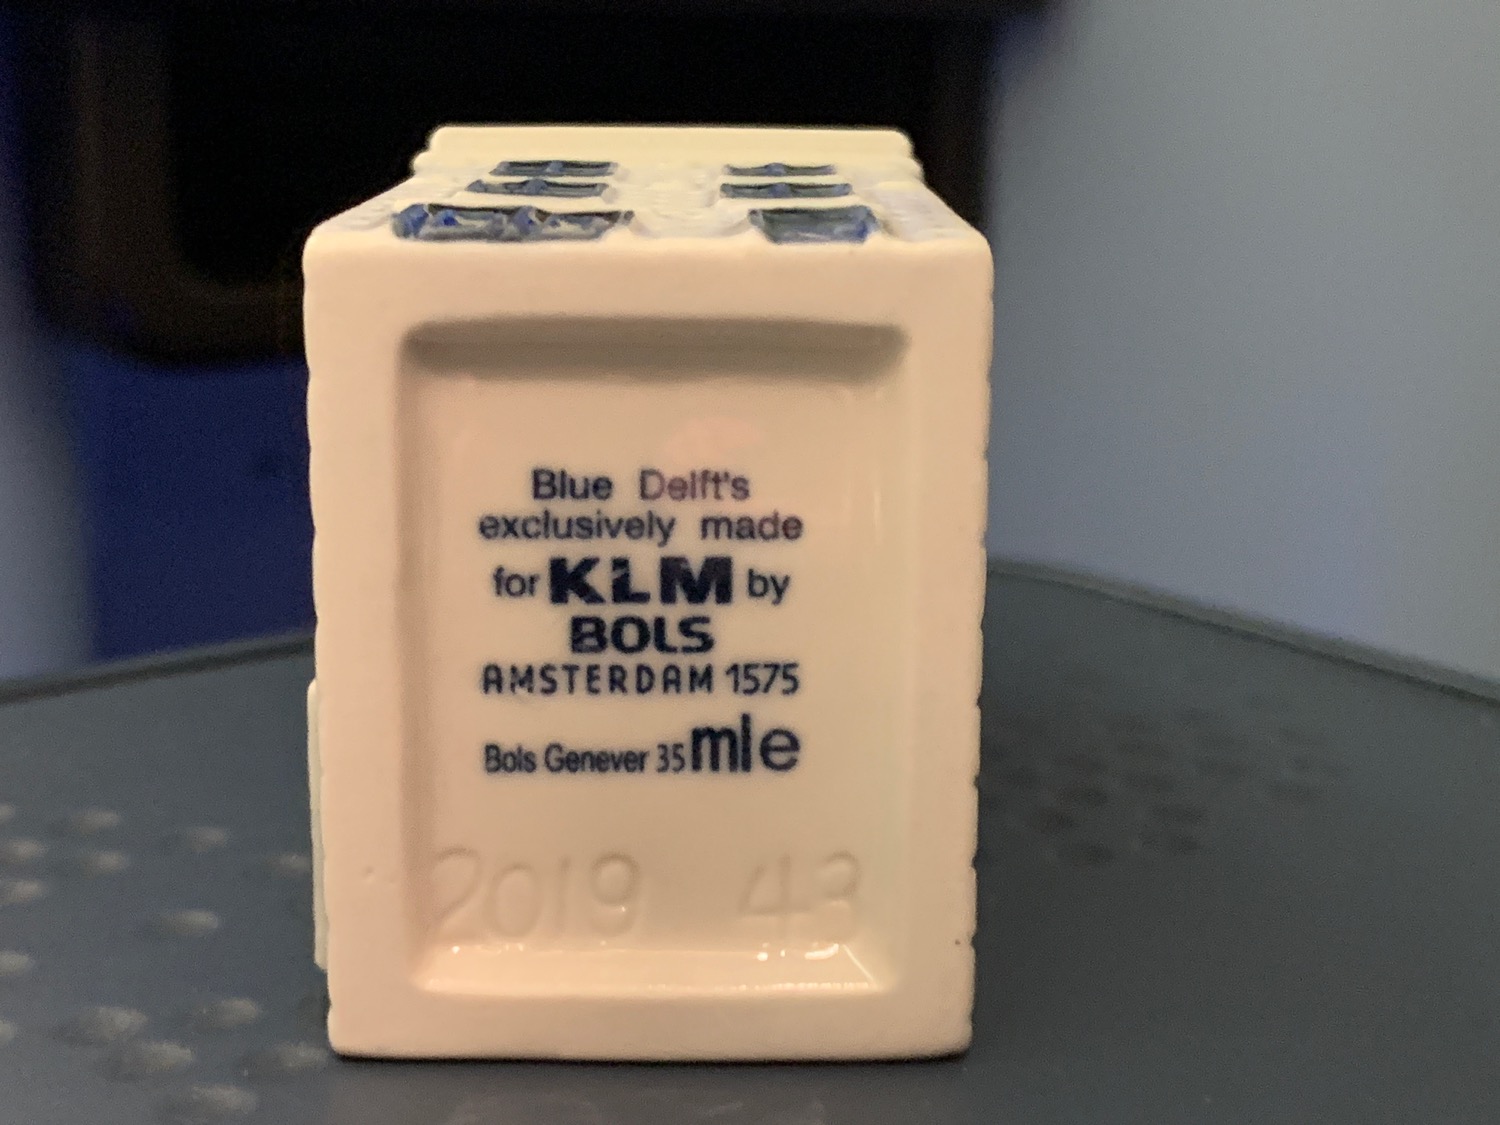 a white rectangular object with blue text on it